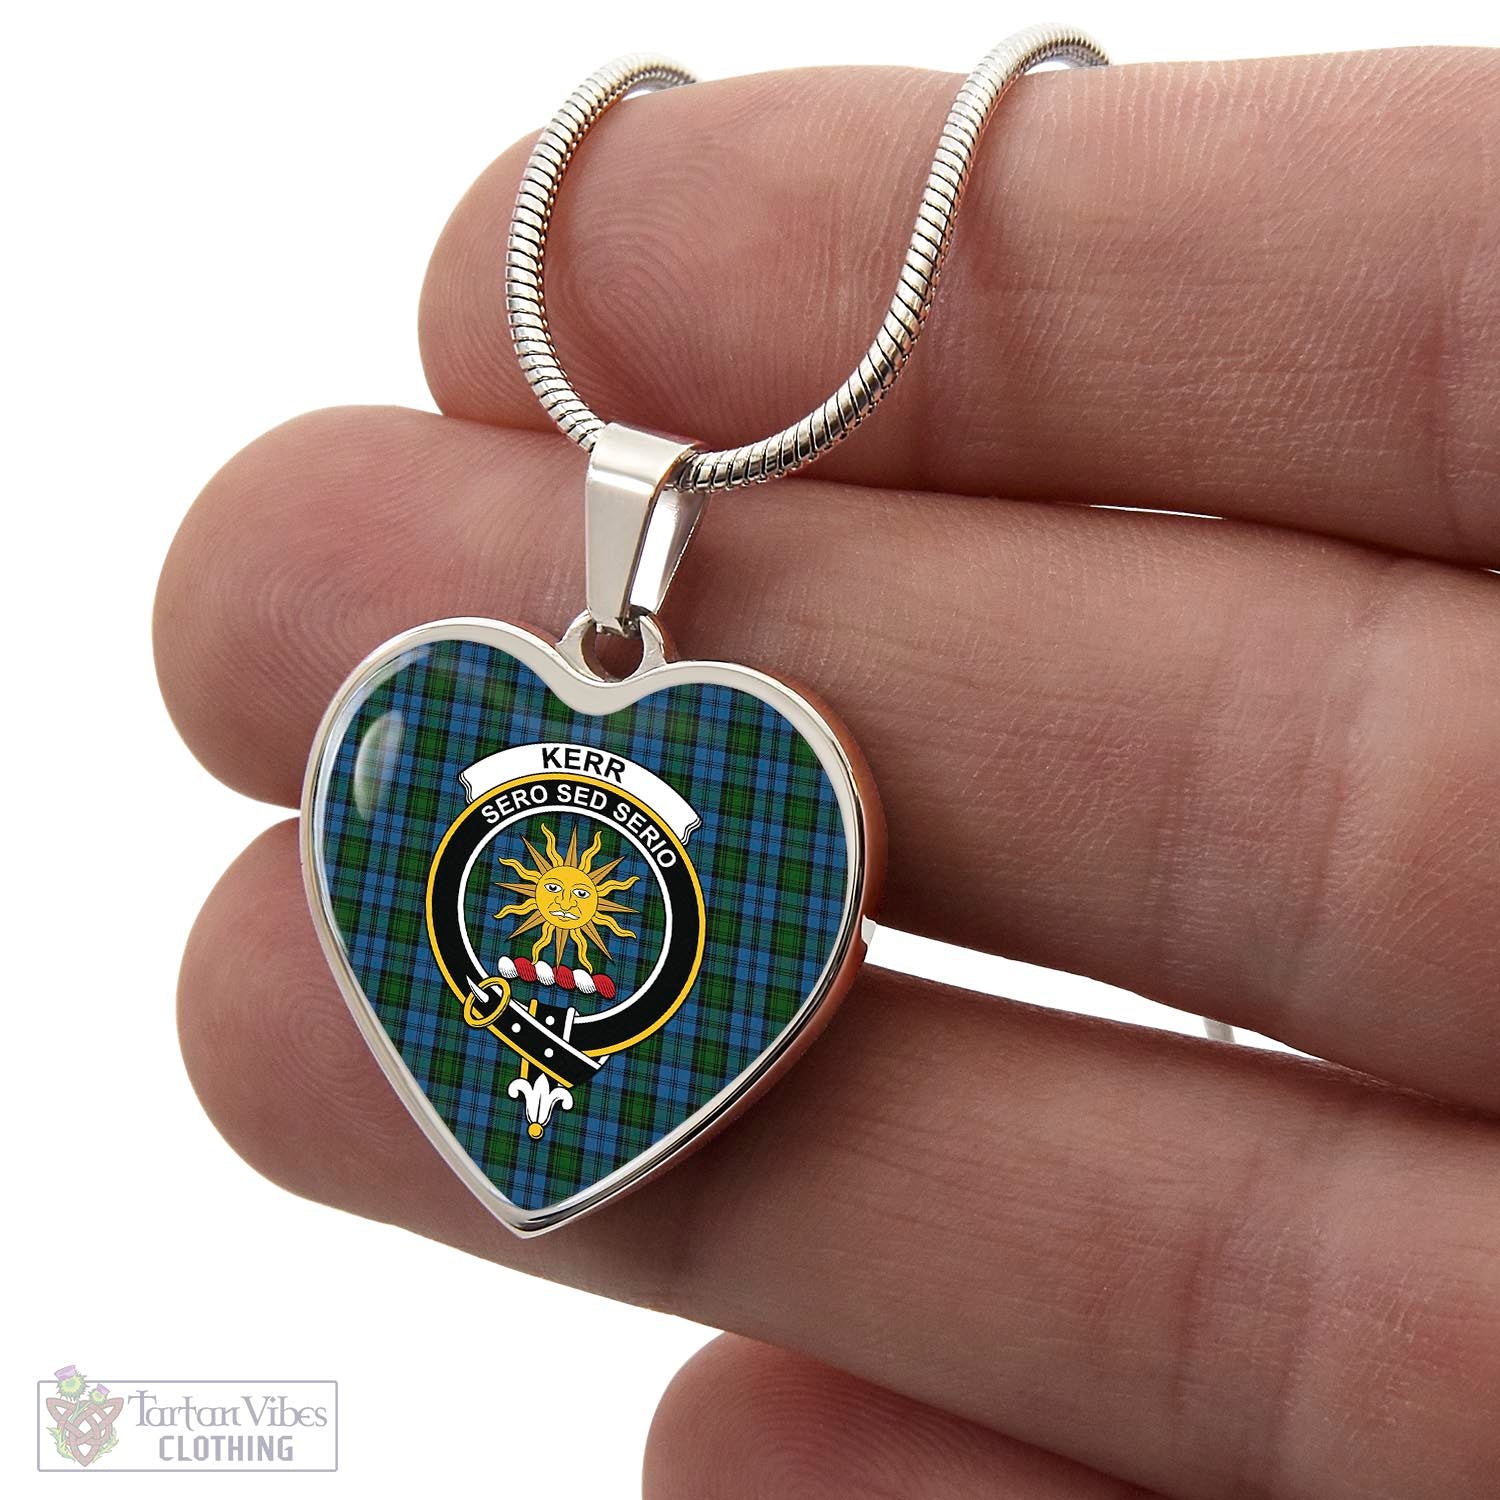 Tartan Vibes Clothing Kerr Hunting Tartan Heart Necklace with Family Crest